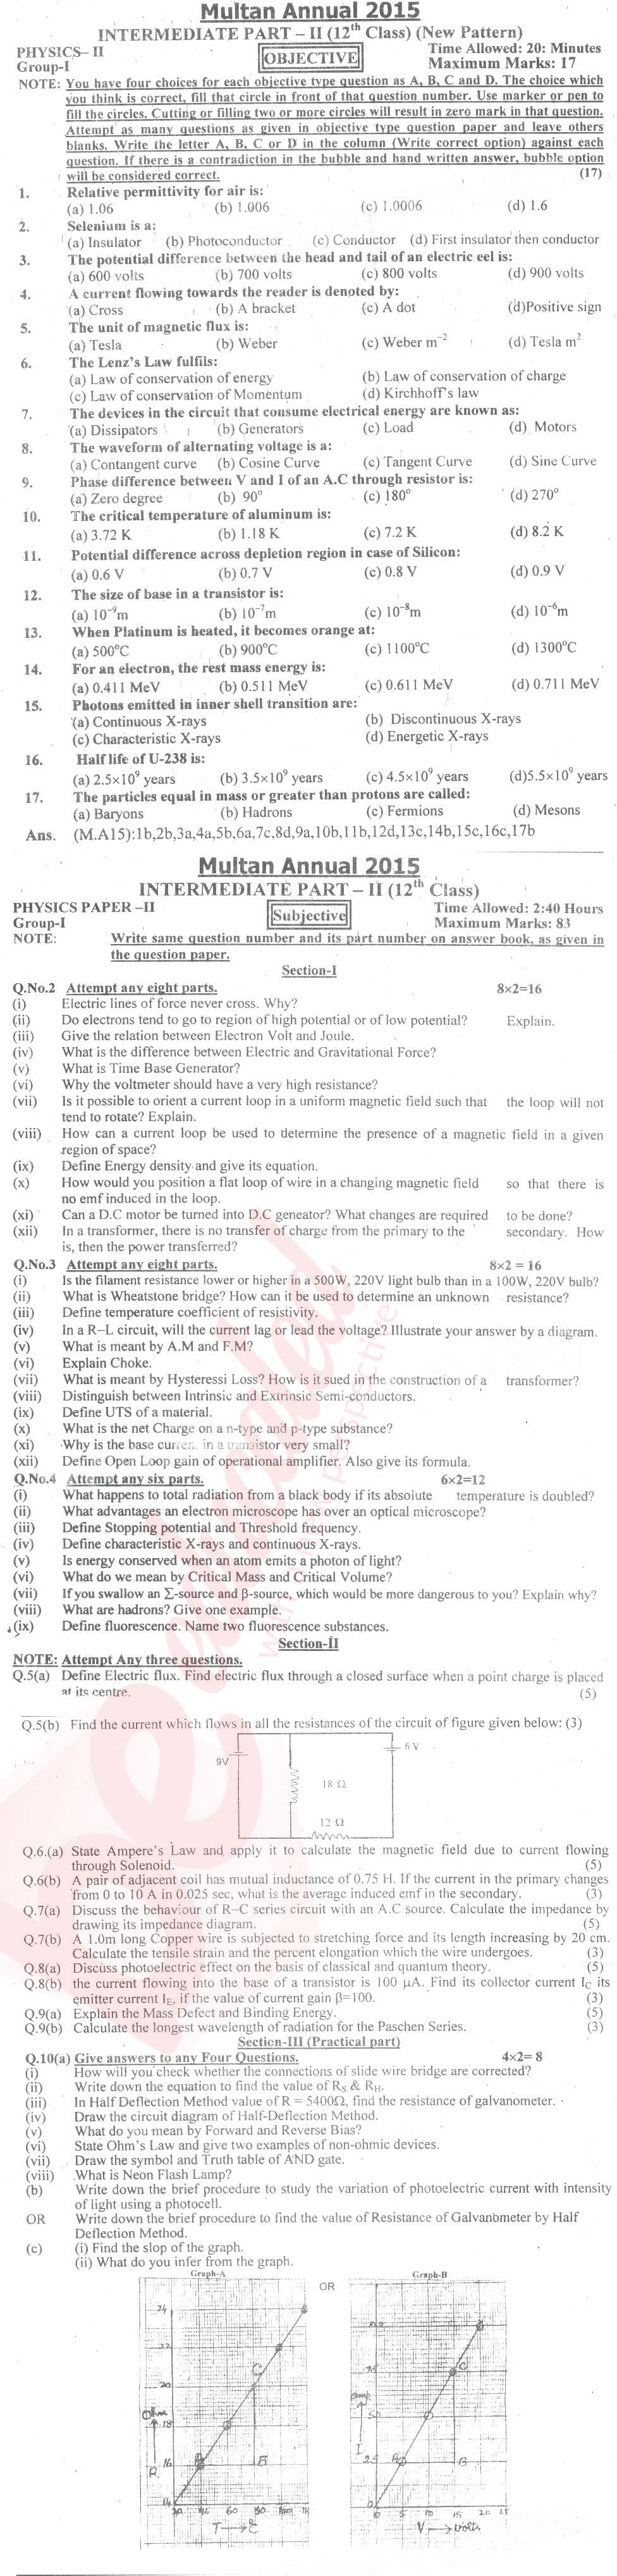 Physics 12th class Past Paper Group 1 BISE Multan 2015